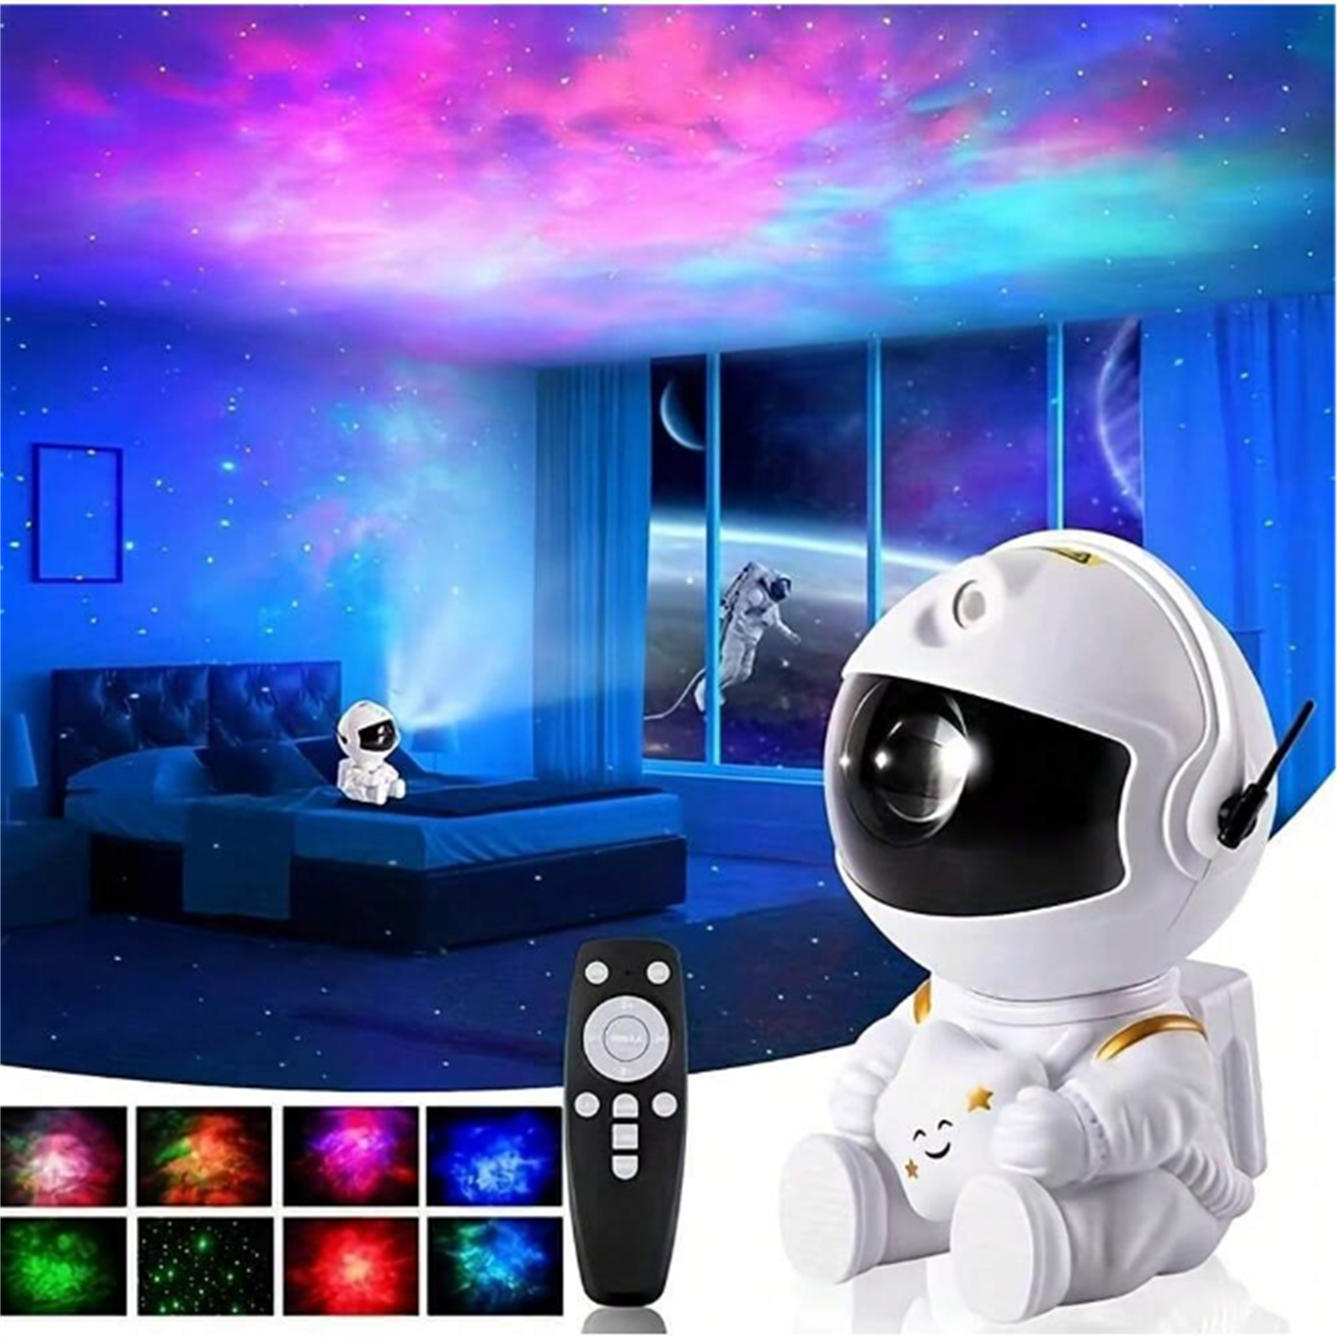 SHEIN 1pc Galaxy Starry Sky Projector LED Night Light, Astronaut Lamp Star Light, Rotation Ceiling Lamp Decoration For Bedroom Decor Gift, Starry Sky Star USB Led Bedroom Night Lamp, Remote Control Included! White one-size